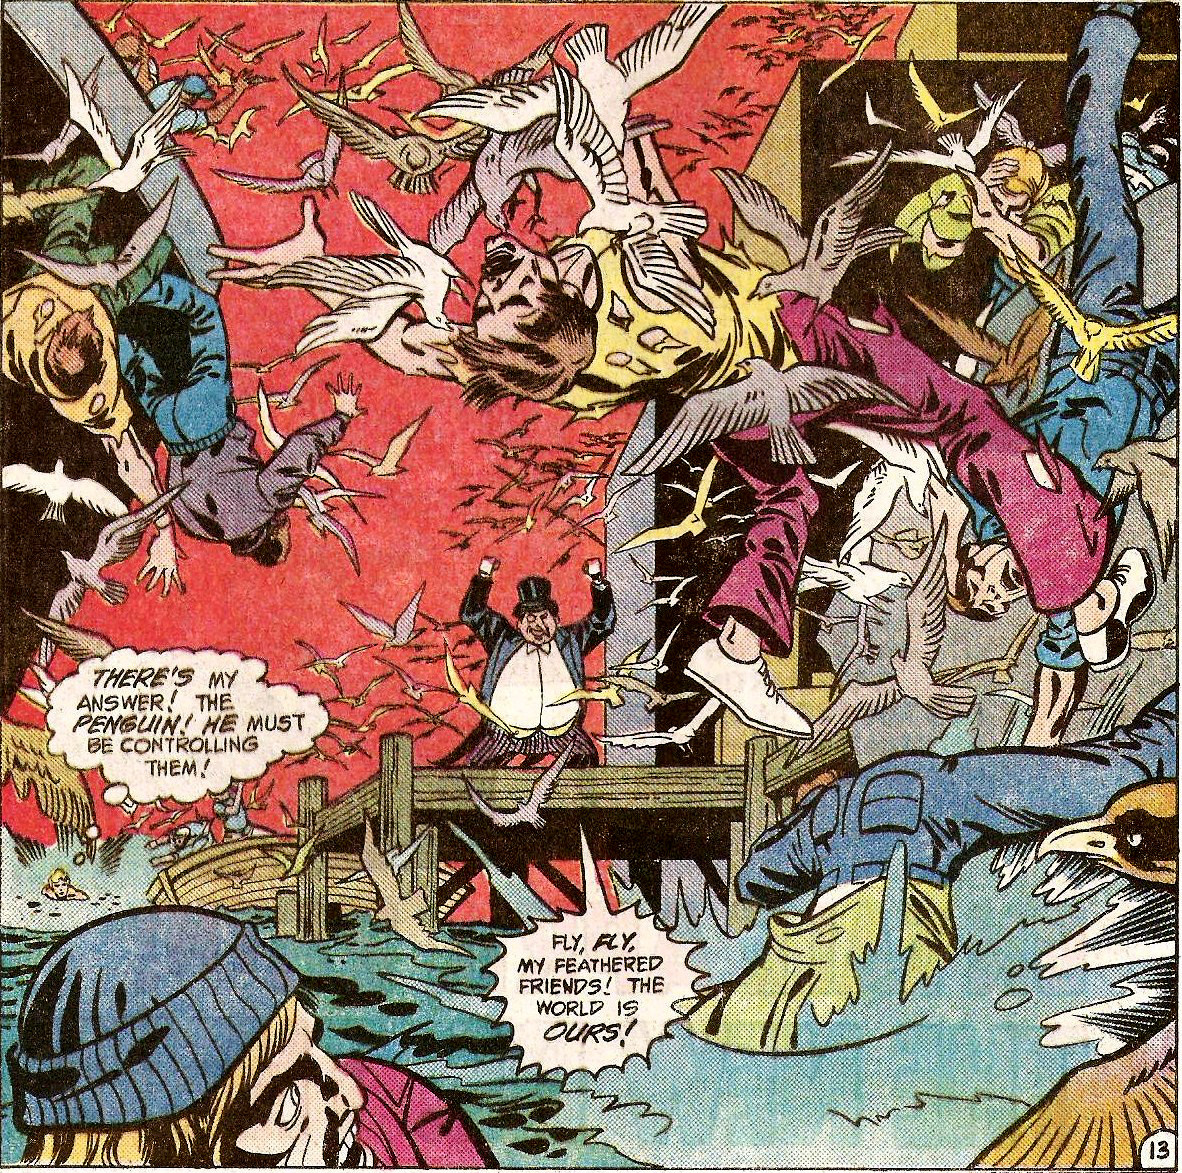 From Super Powers (Vol. 1) #1 (1984)